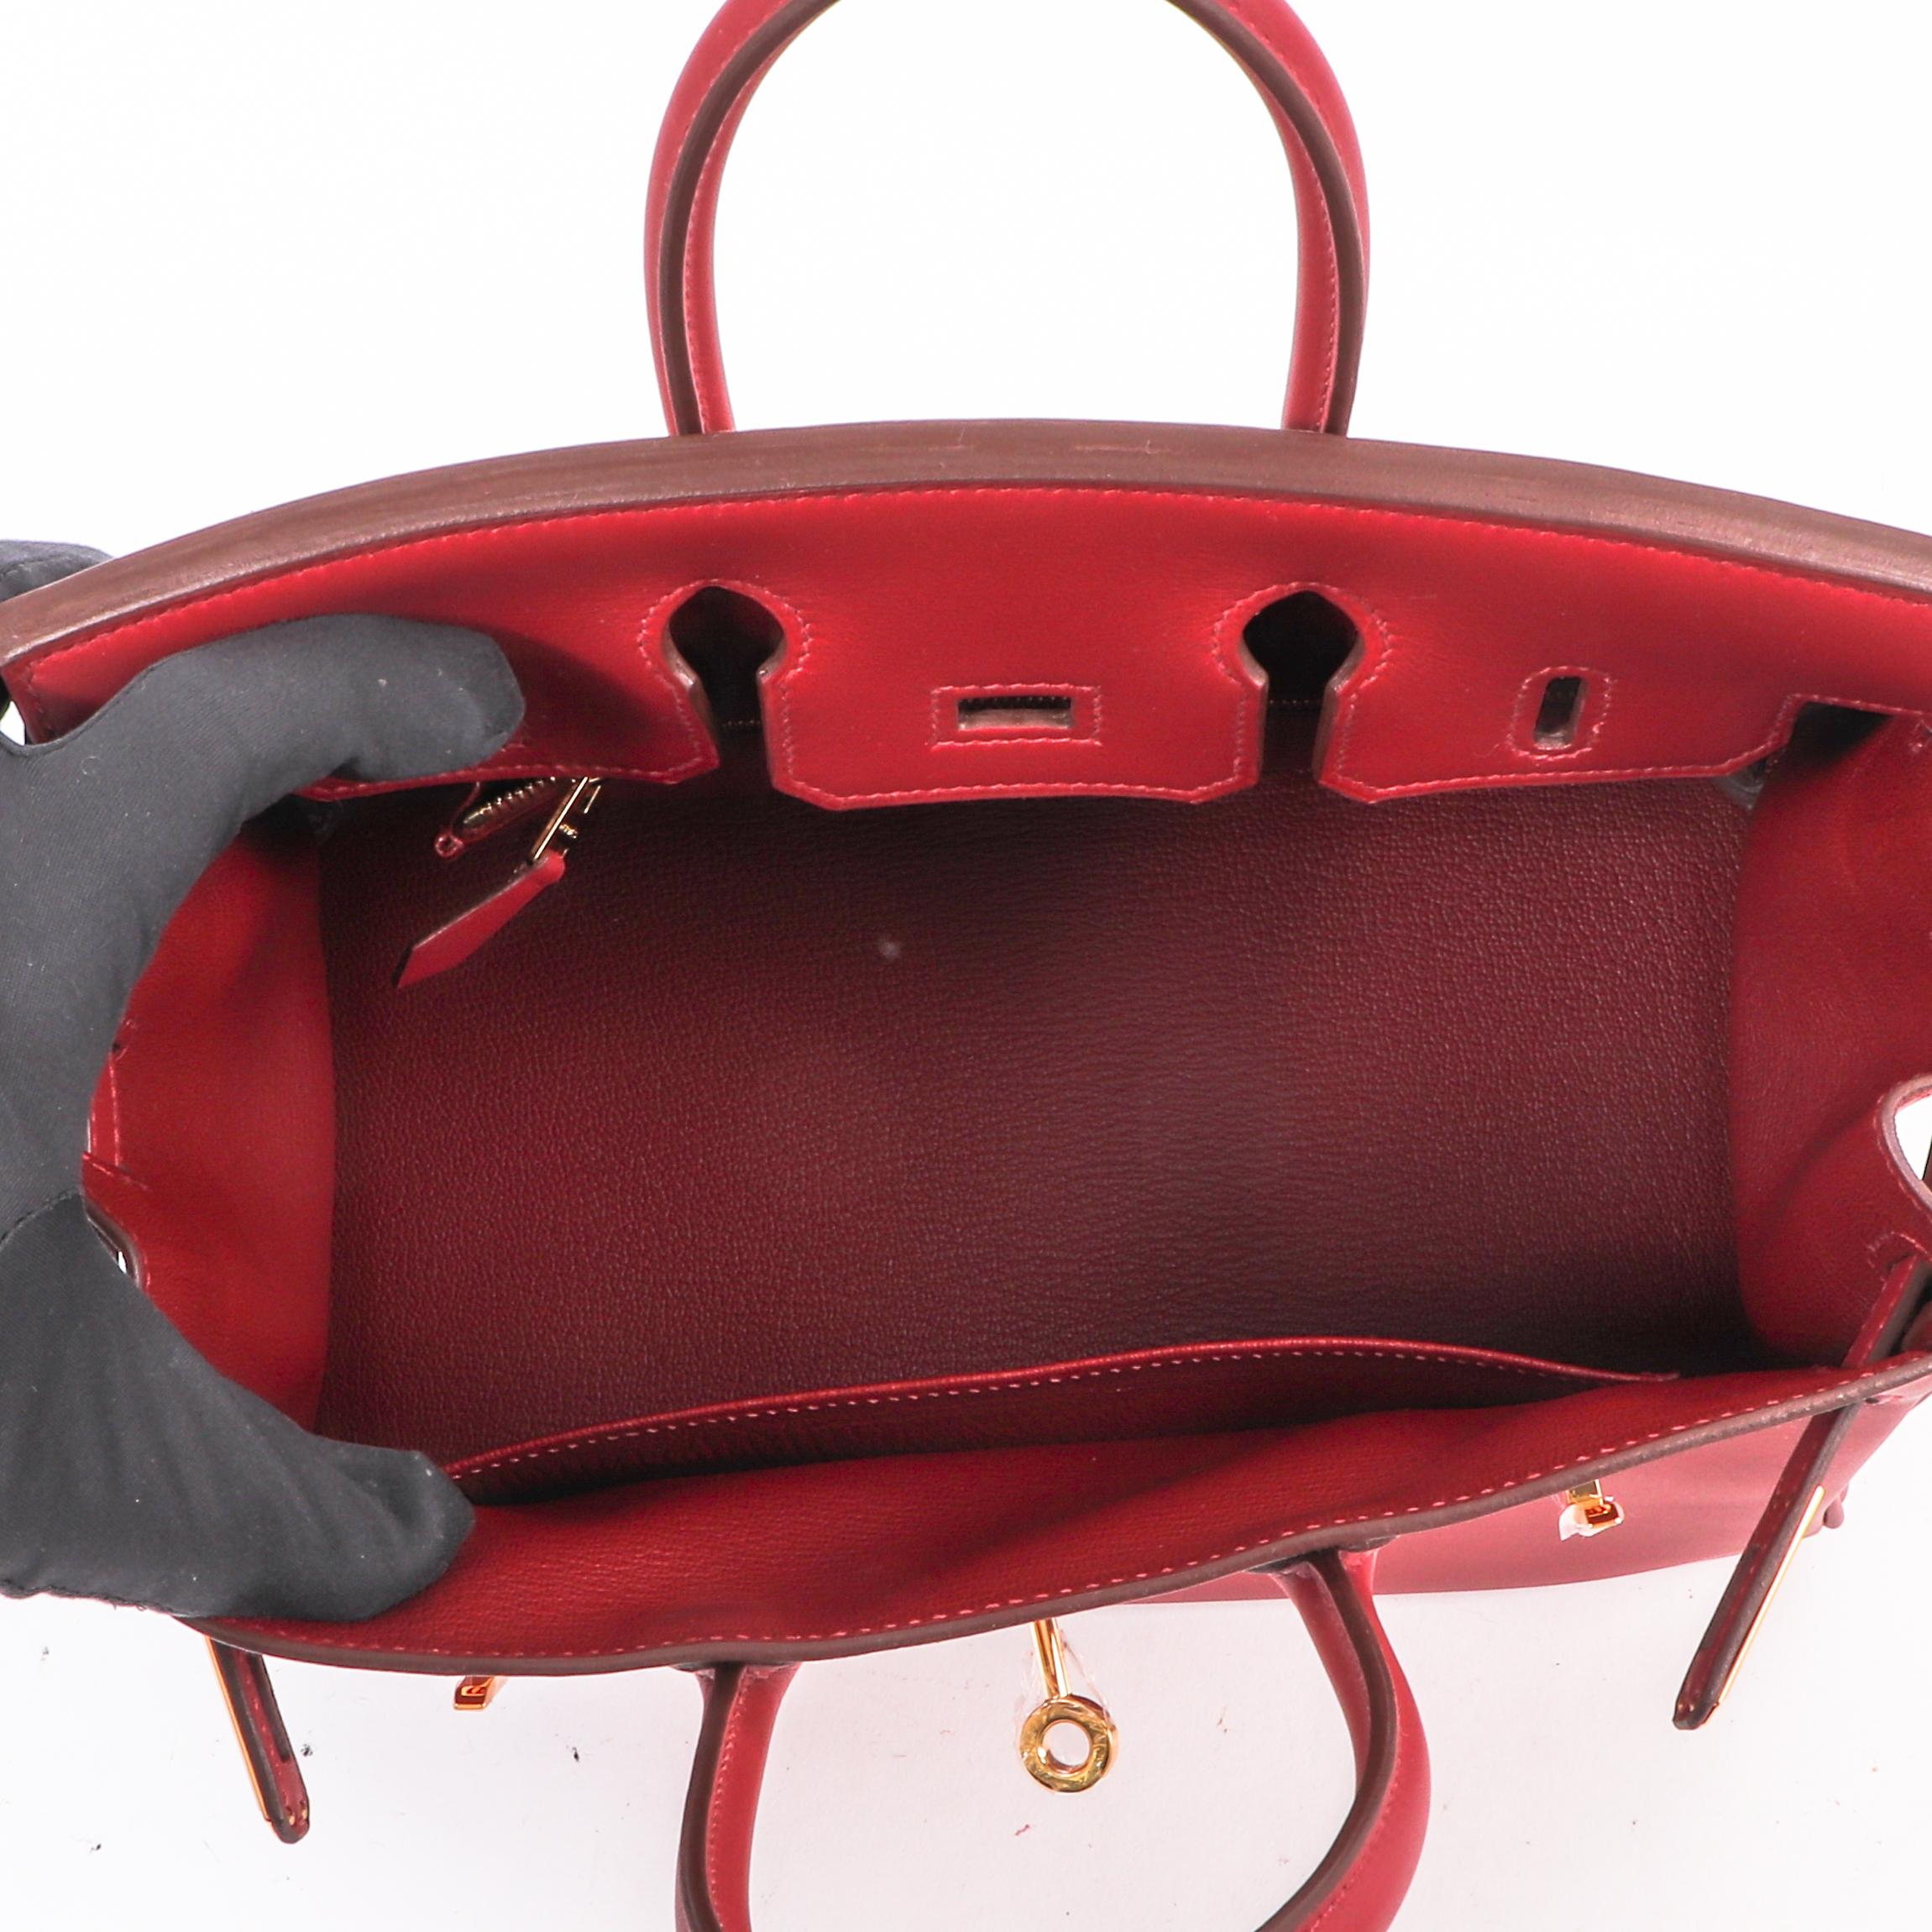 Hermès Birkin 25 Rouge Vif Veau Jonathan Gold Hardware

This stunning Hermès Birkin 25 handbag is crafted of buttery soft Veau Jonathan leather in Rouge Vif red. The Veau Jonathan leather resembles the Swift leather, it is a fine-grained calf